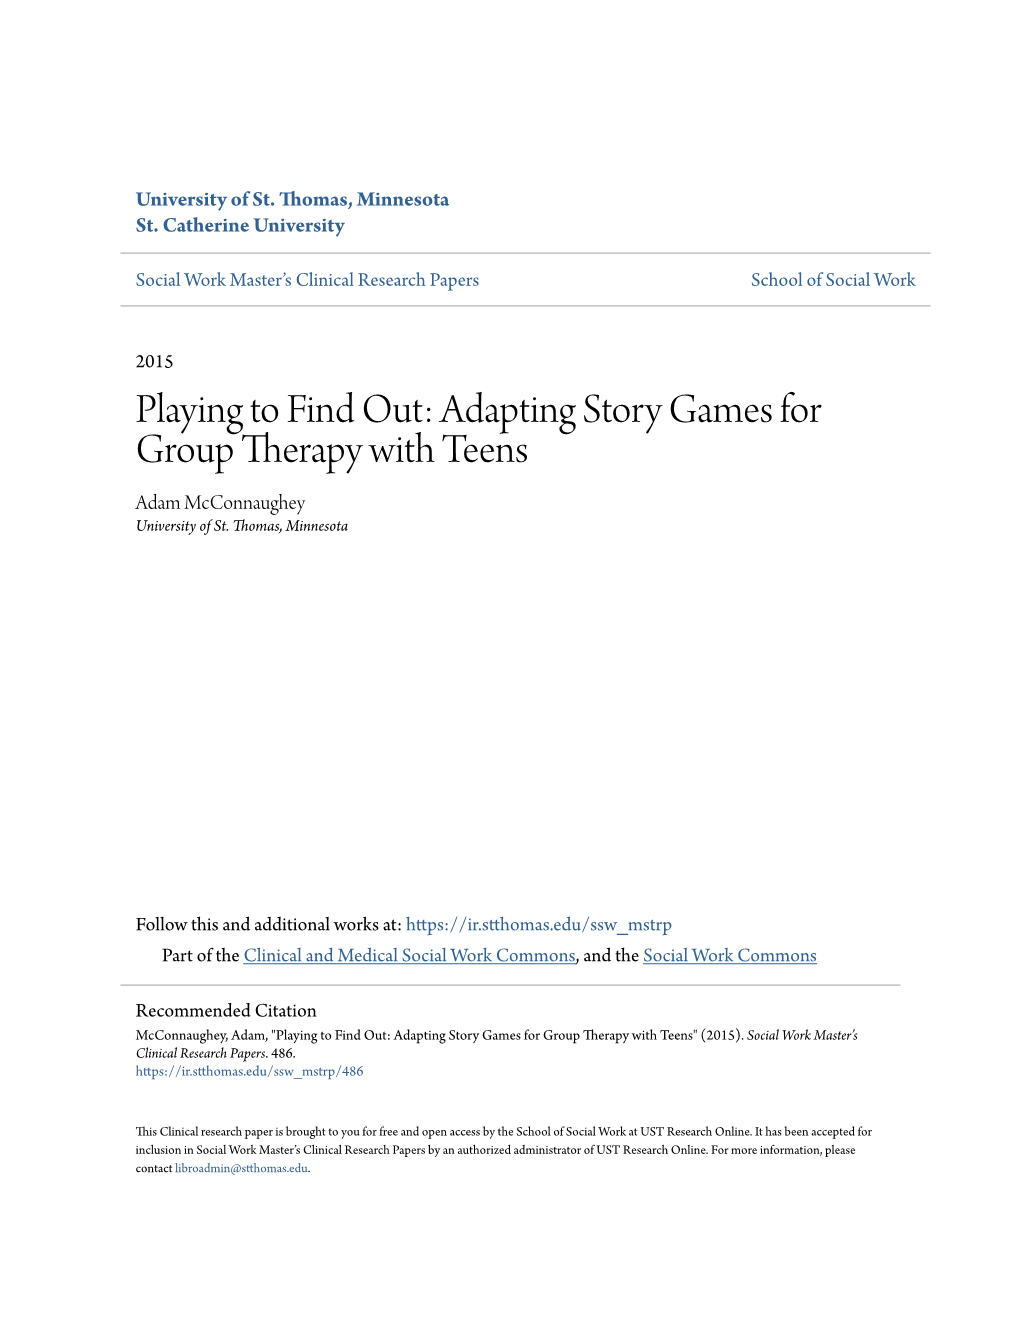 Adapting Story Games for Group Therapy with Teens Adam Mcconnaughey University of St